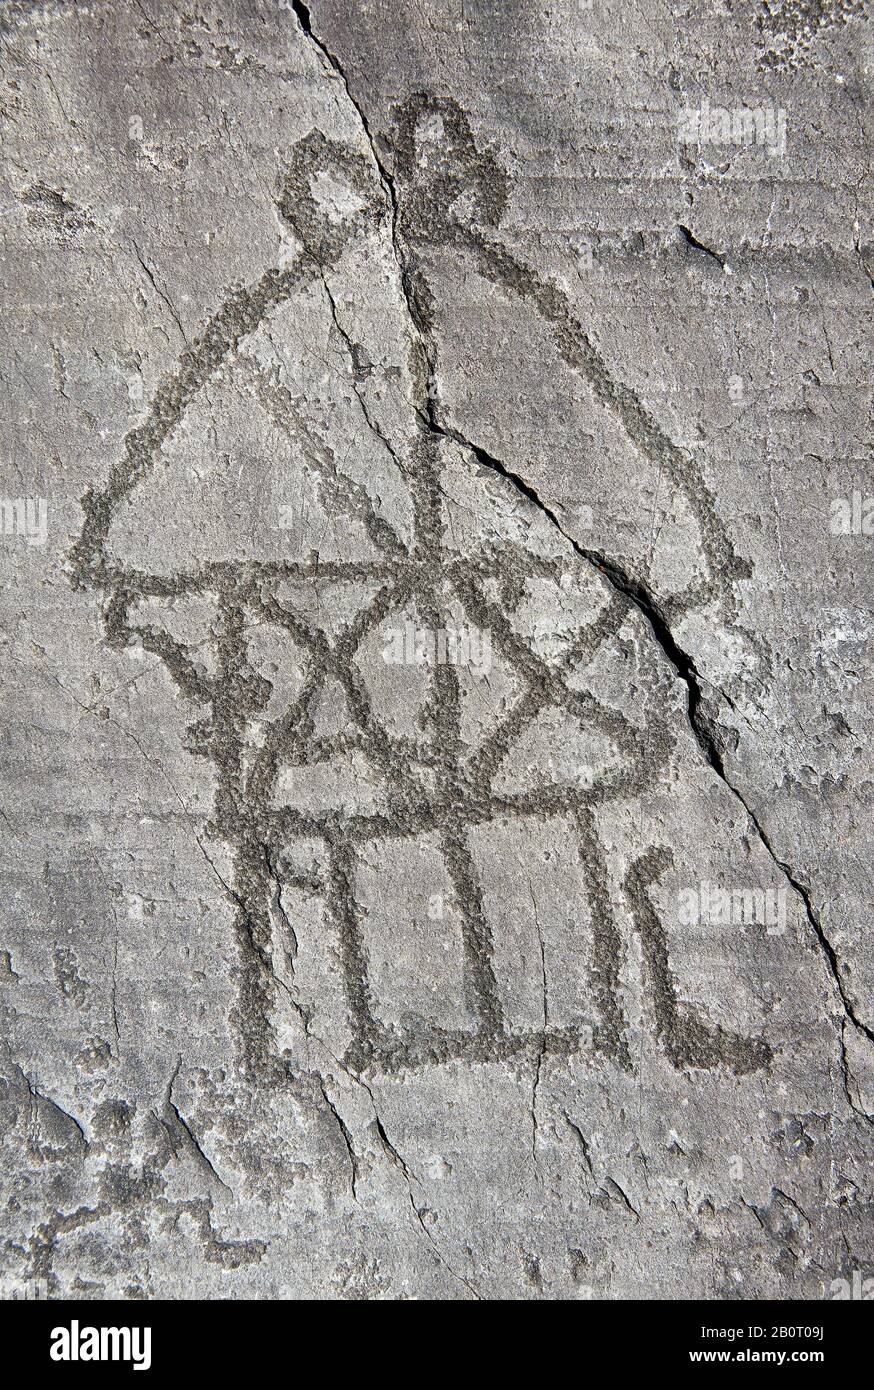 Petroglyph, rock carving, of a house on stilts. Carved by the ancient Camuni people in the iron age between 1000-1200 BC. Rock no 24, Foppi di Nadro, Stock Photo